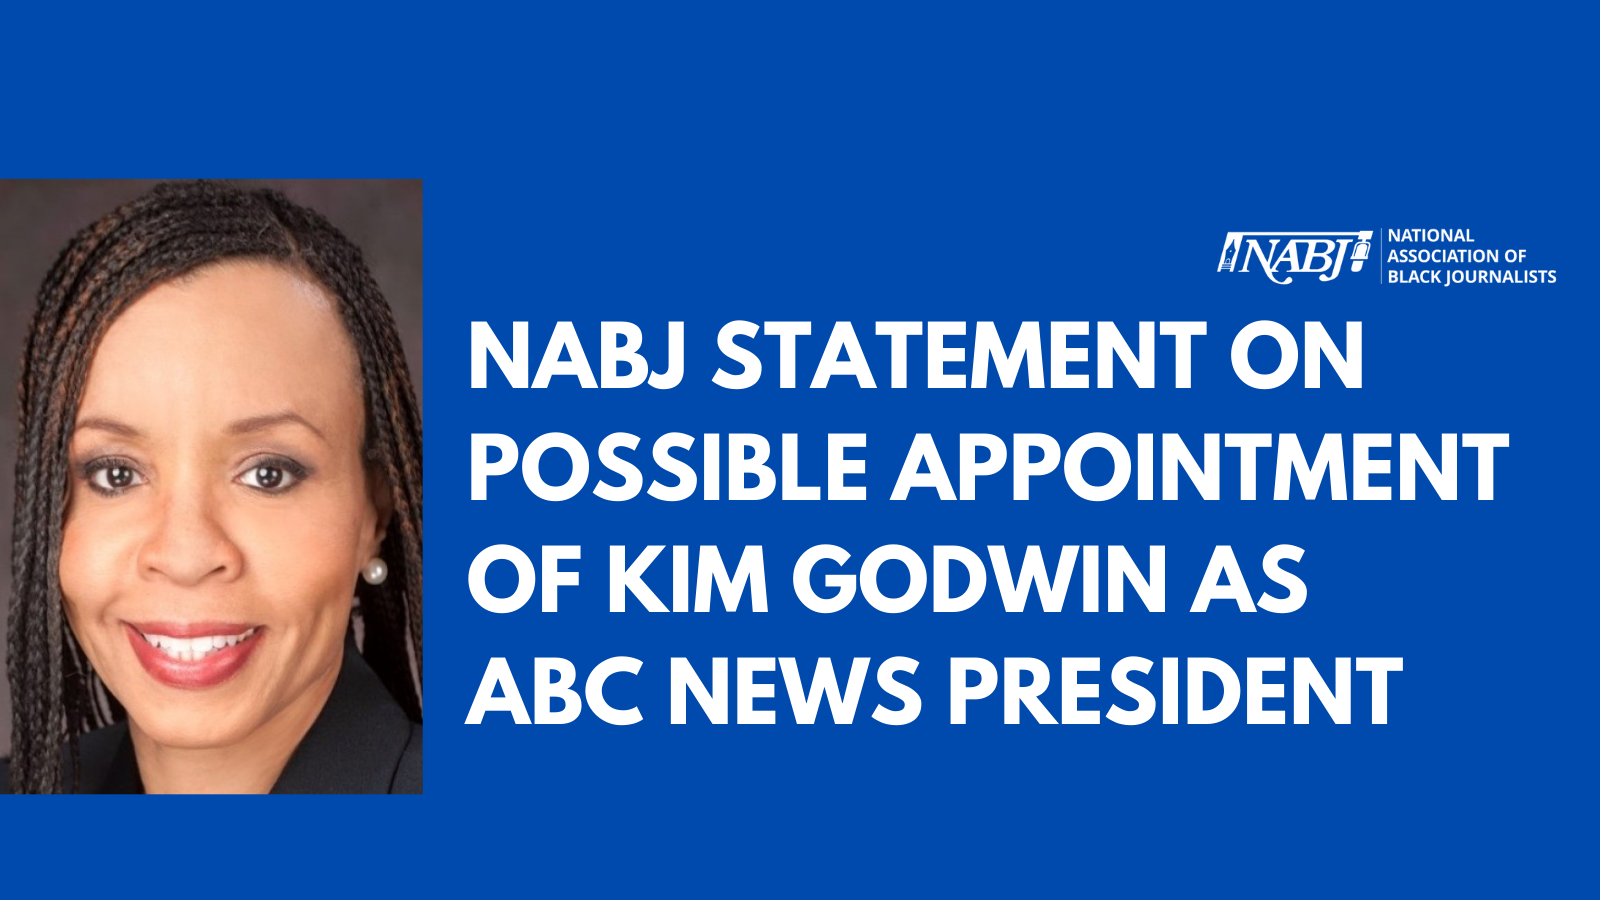  NABJ Statement on Possible Appointment of Kim Godwin at ABC